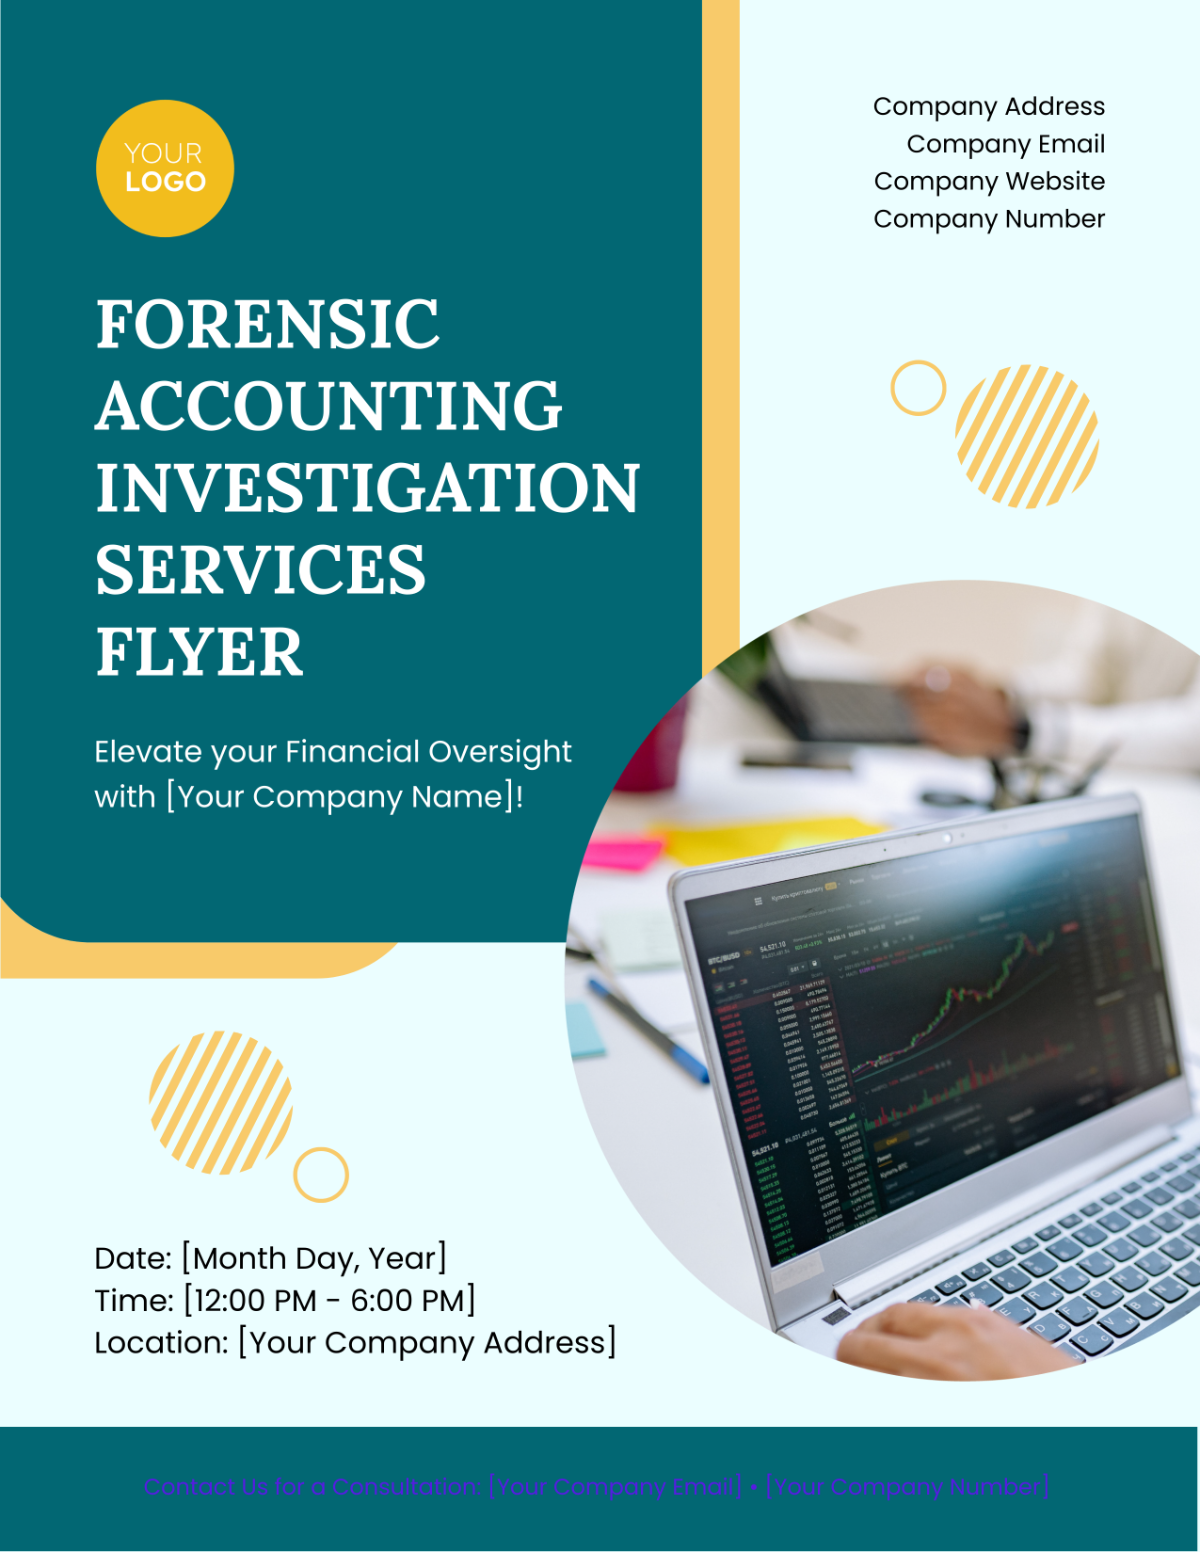 Forensic Accounting Investigation Services Flyer Template